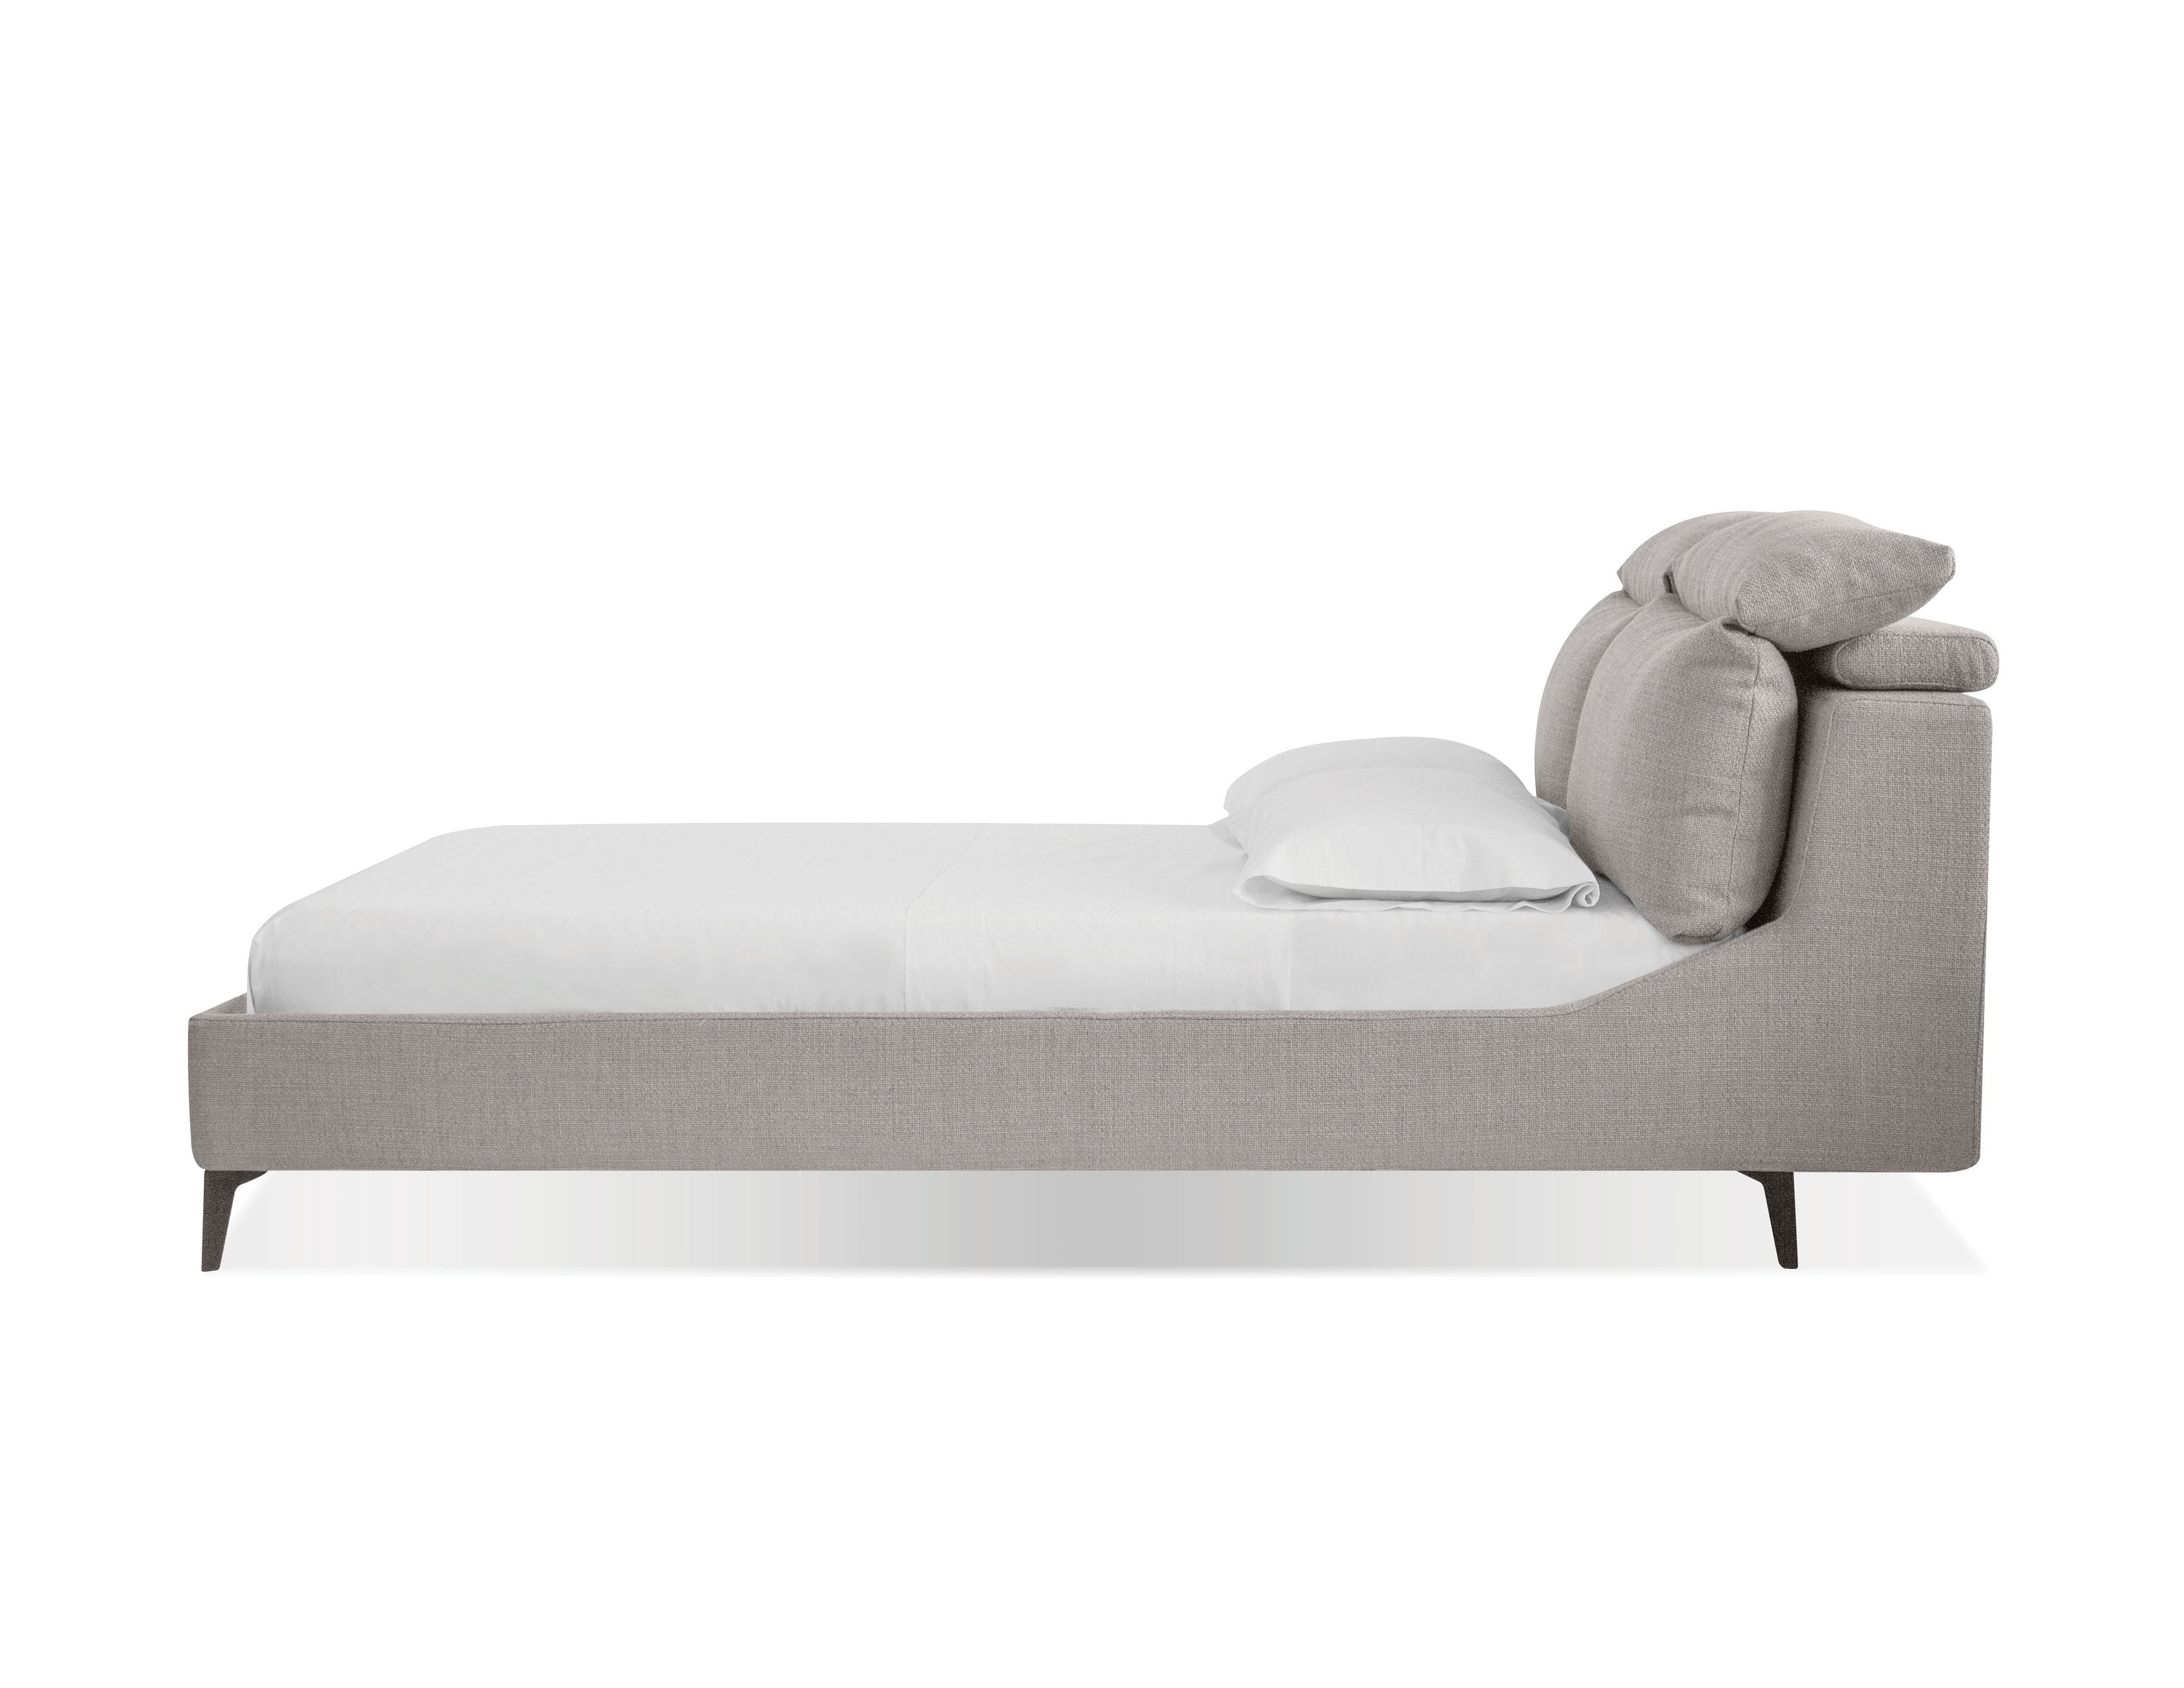 //mobital.ca/cdn/shop/products/BED-CHIL-STON-KING_1.png?v=1703111111&width=360 360w,//mobital.ca/cdn/shop/products/BED-CHIL-STON-KING_1.png?v=1703111111&width=375 375w,//mobital.ca/cdn/shop/products/BED-CHIL-STON-KING_1.png?v=1703111111&width=535 535w,//mobital.ca/cdn/shop/products/BED-CHIL-STON-KING_1.png?v=1703111111&width=750 750w,//mobital.ca/cdn/shop/products/BED-CHIL-STON-KING_1.png?v=1703111111&width=1024 1024w,//mobital.ca/cdn/shop/products/BED-CHIL-STON-KING_1.png?v=1703111111&width=1280 1280w,//mobital.ca/cdn/shop/products/BED-CHIL-STON-KING_1.png?v=1703111111&width=1366 1366w,//mobital.ca/cdn/shop/products/BED-CHIL-STON-KING_1.png?v=1703111111&width=1440 1440w,//mobital.ca/cdn/shop/products/BED-CHIL-STON-KING_1.png?v=1703111111&width=1920 1920w,//mobital.ca/cdn/shop/products/BED-CHIL-STON-KING_1.png?v=1703111111&width=2880 2880w